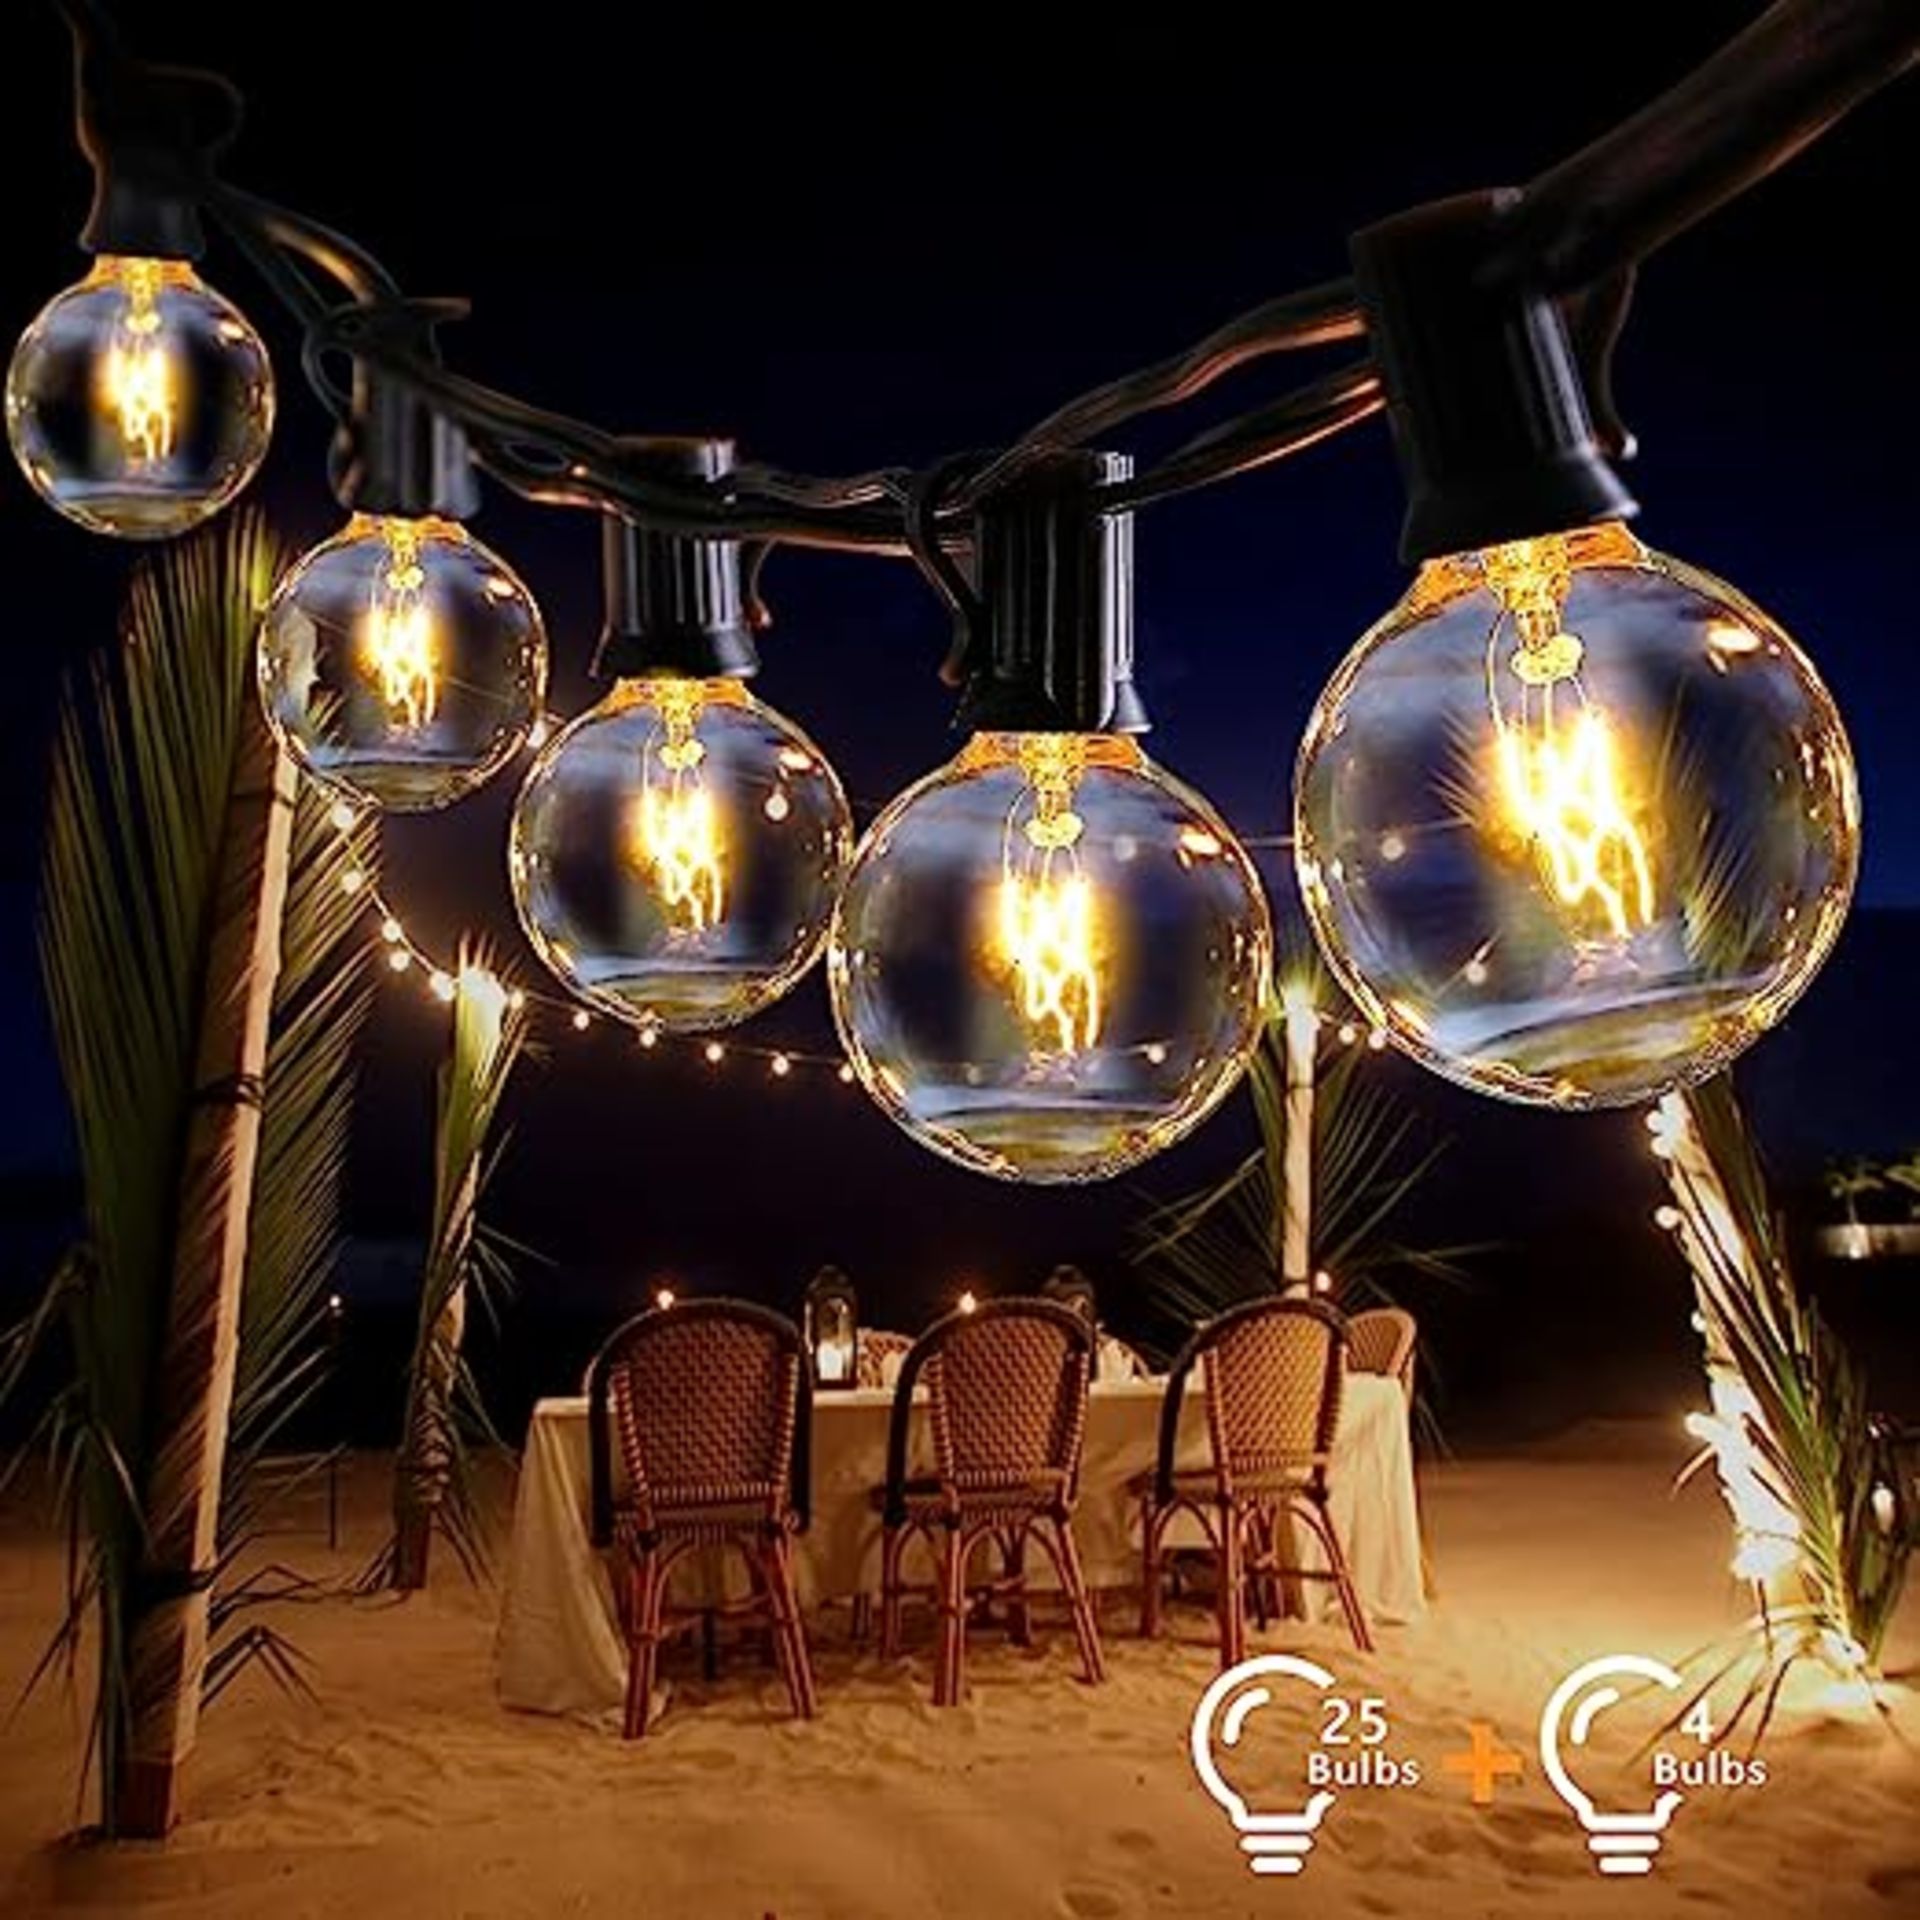 5 x New Boxed Sets of 25 Outdoor Festoon String Lights. 7.5m Long (24.6 foot). G40 Bulbs, IP44 - Image 2 of 3